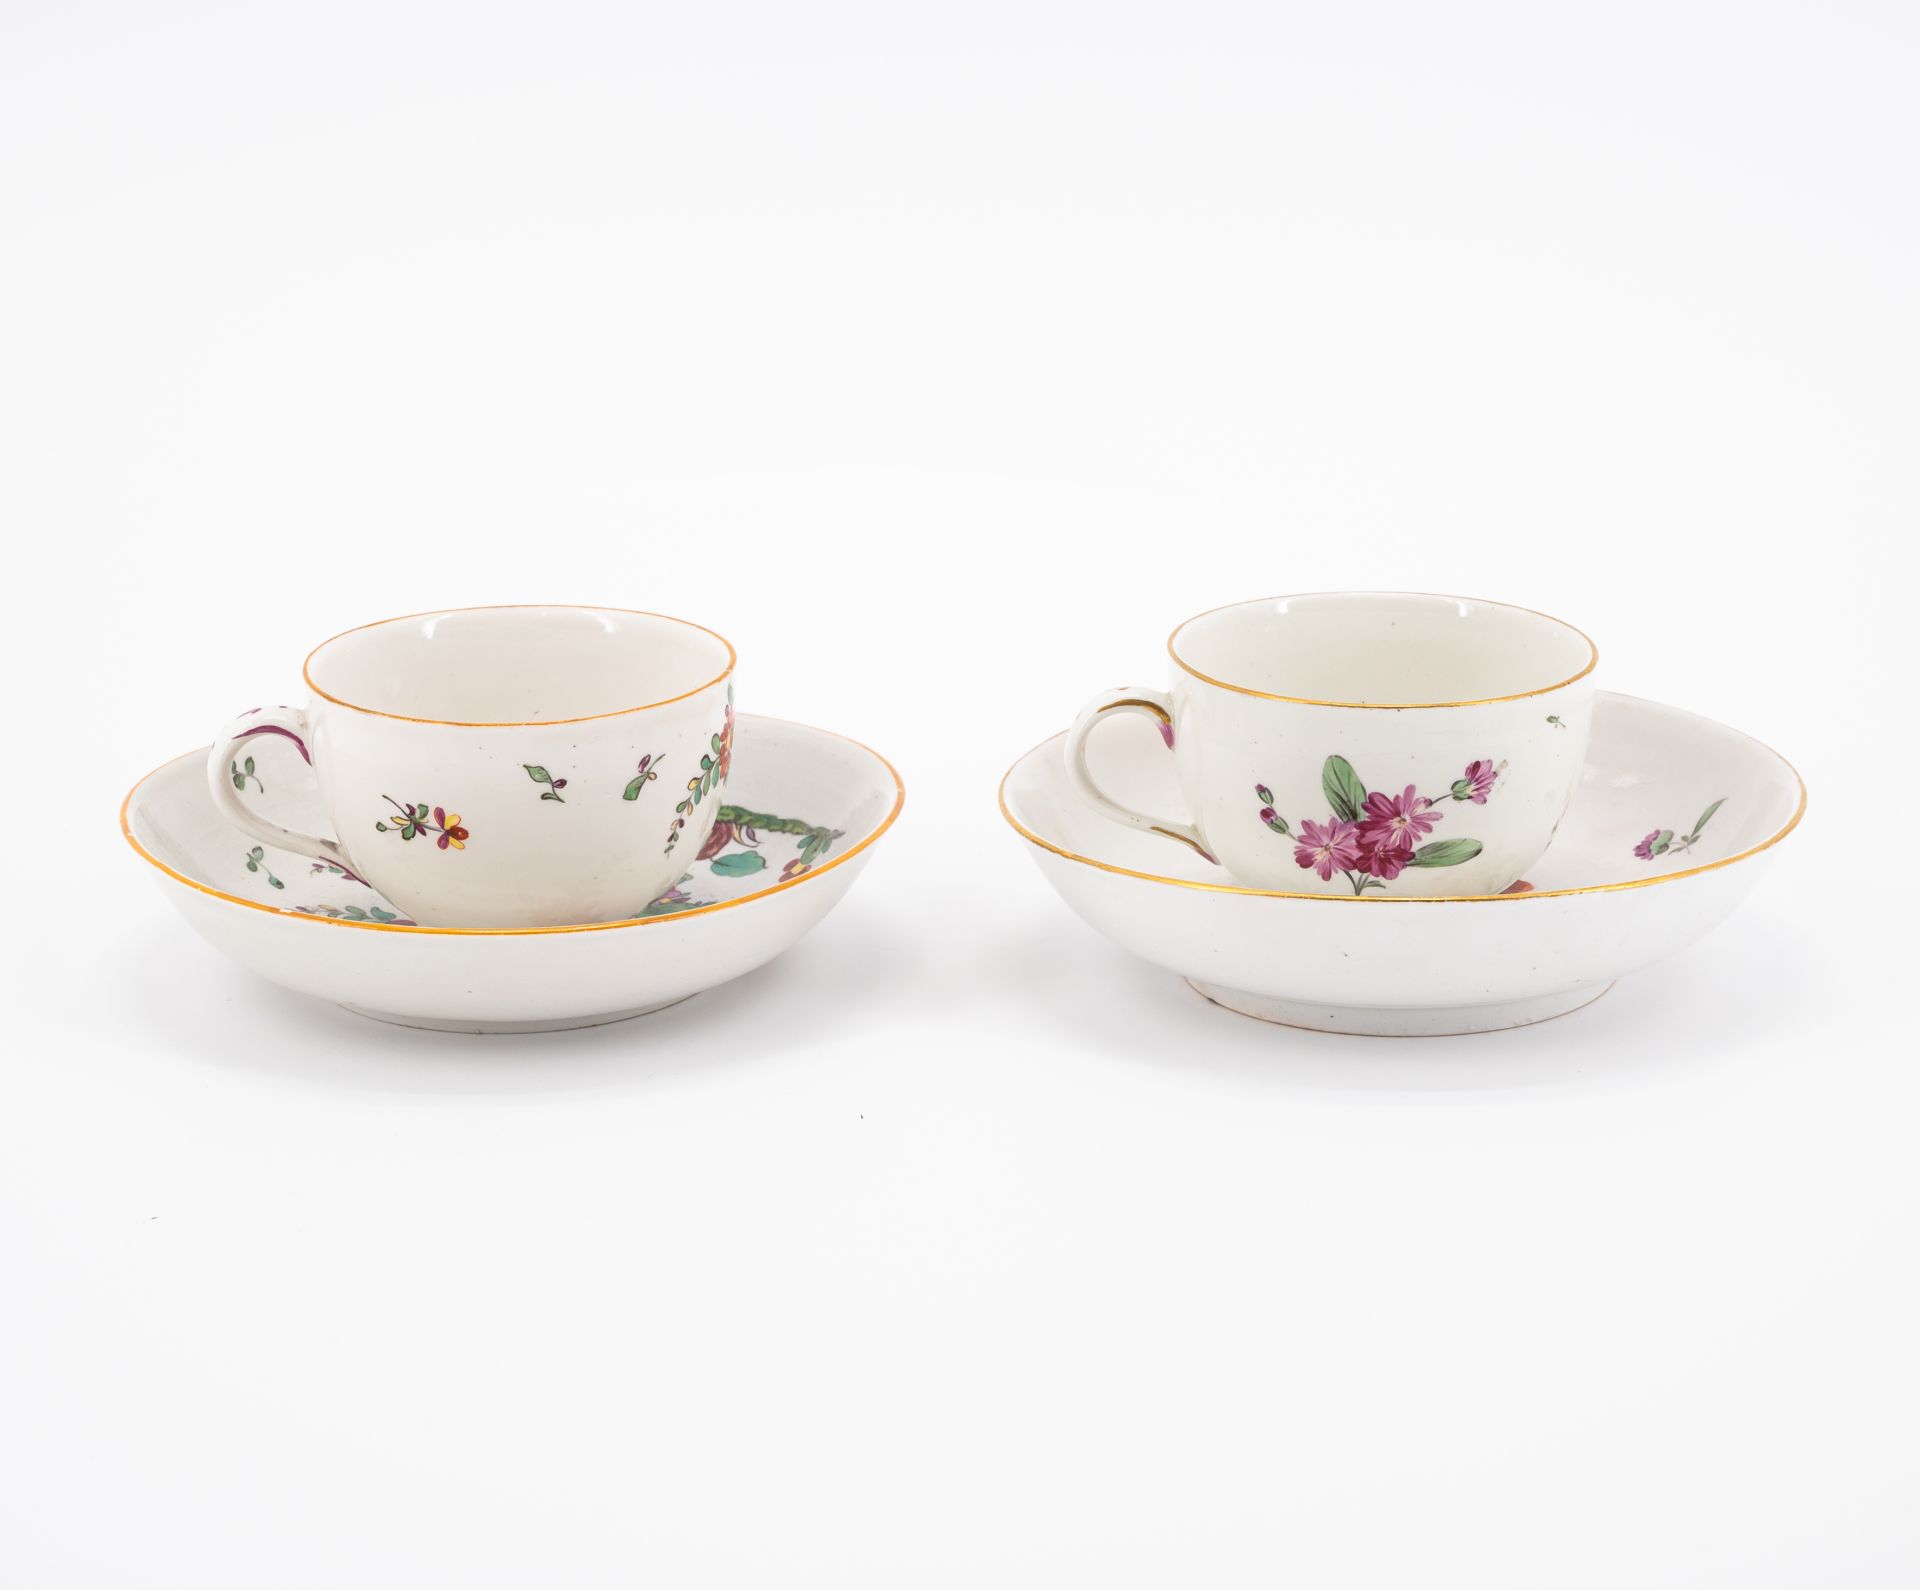 SIX PORCELAIN CUPS AND THREE SAUCERS WITH BIRD DECOR, FLOWERS AND LANDSCAPE SCENES - Image 9 of 16